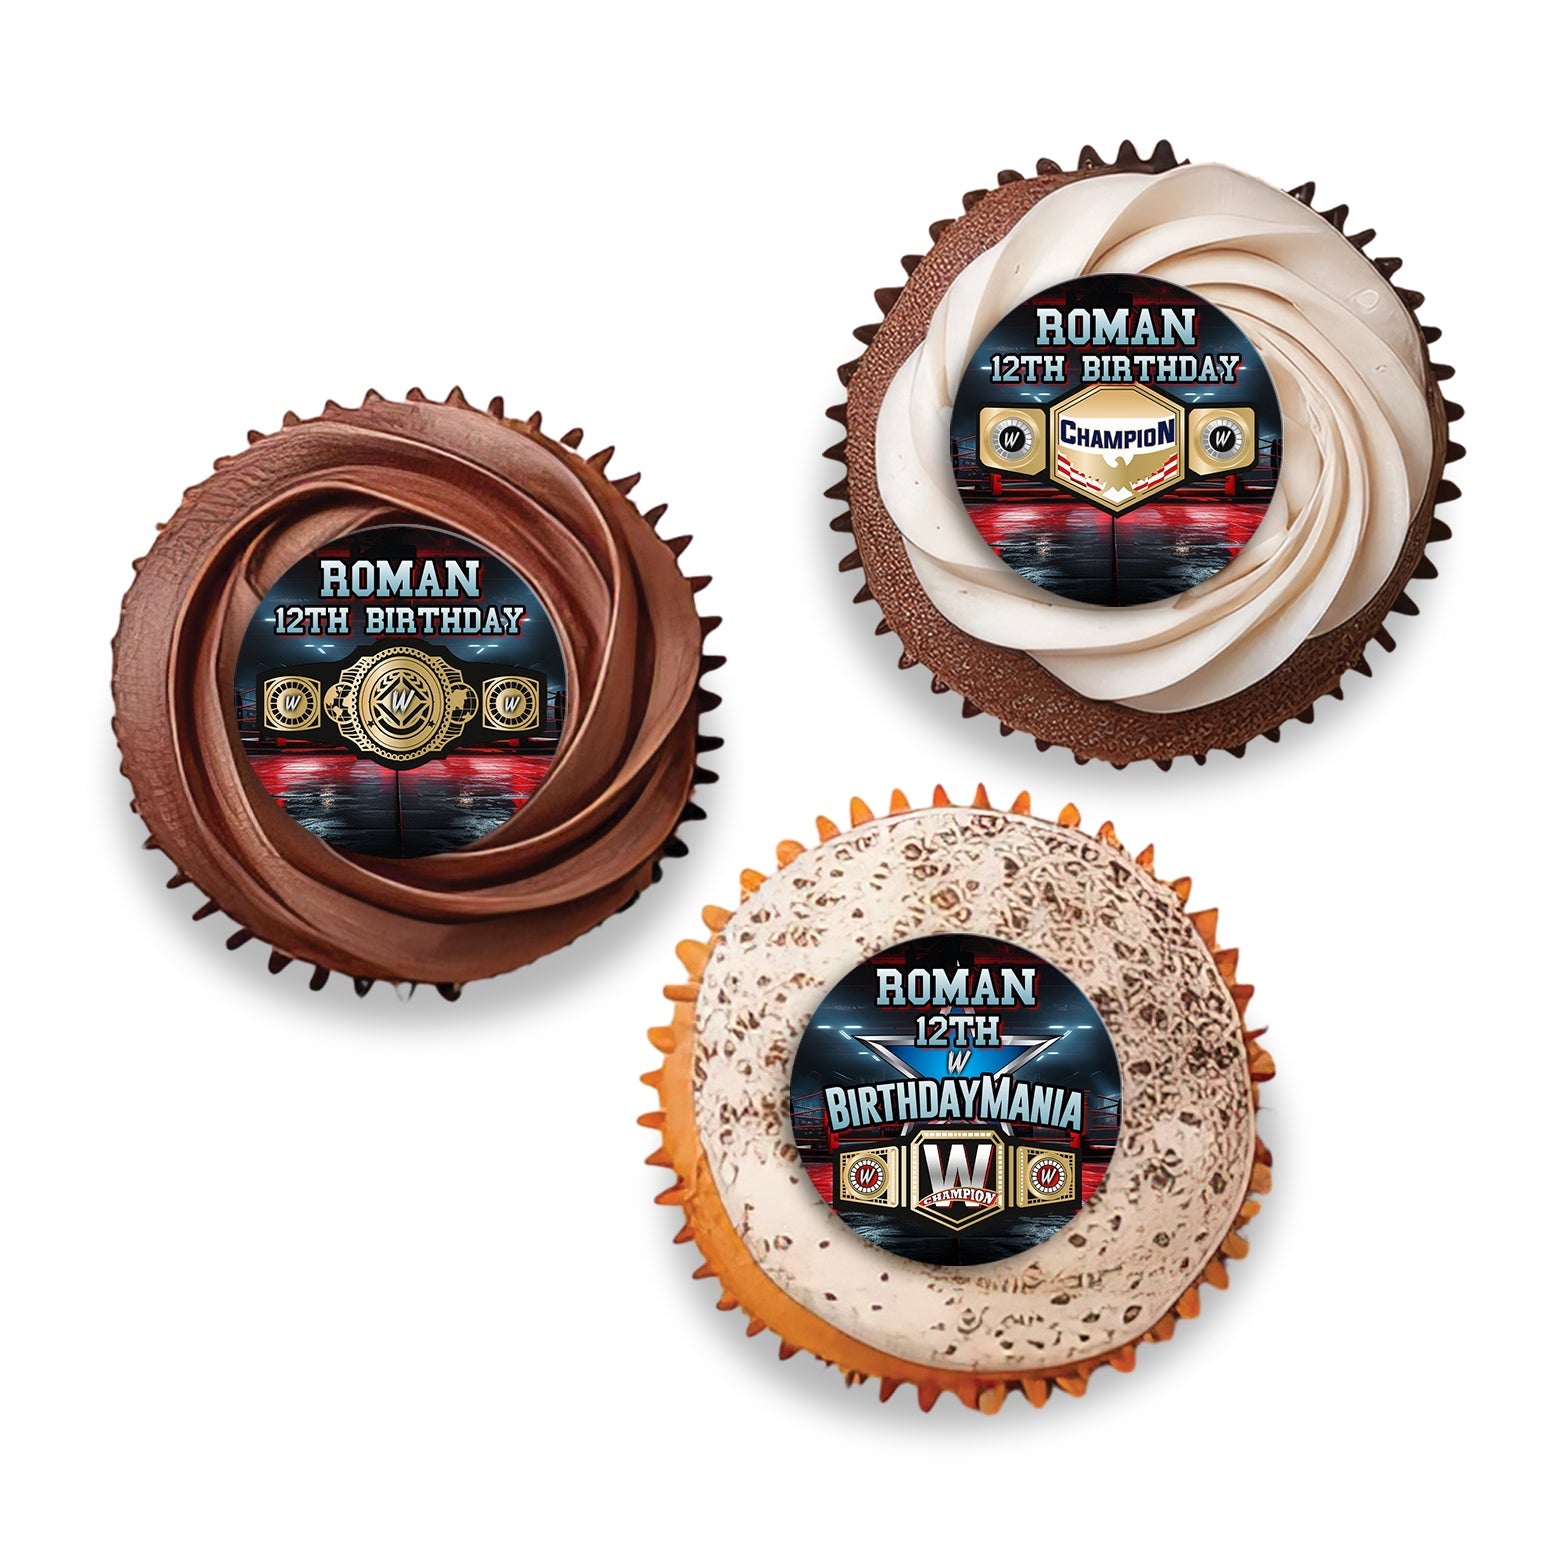 Personalized WWE cupcake toppers set